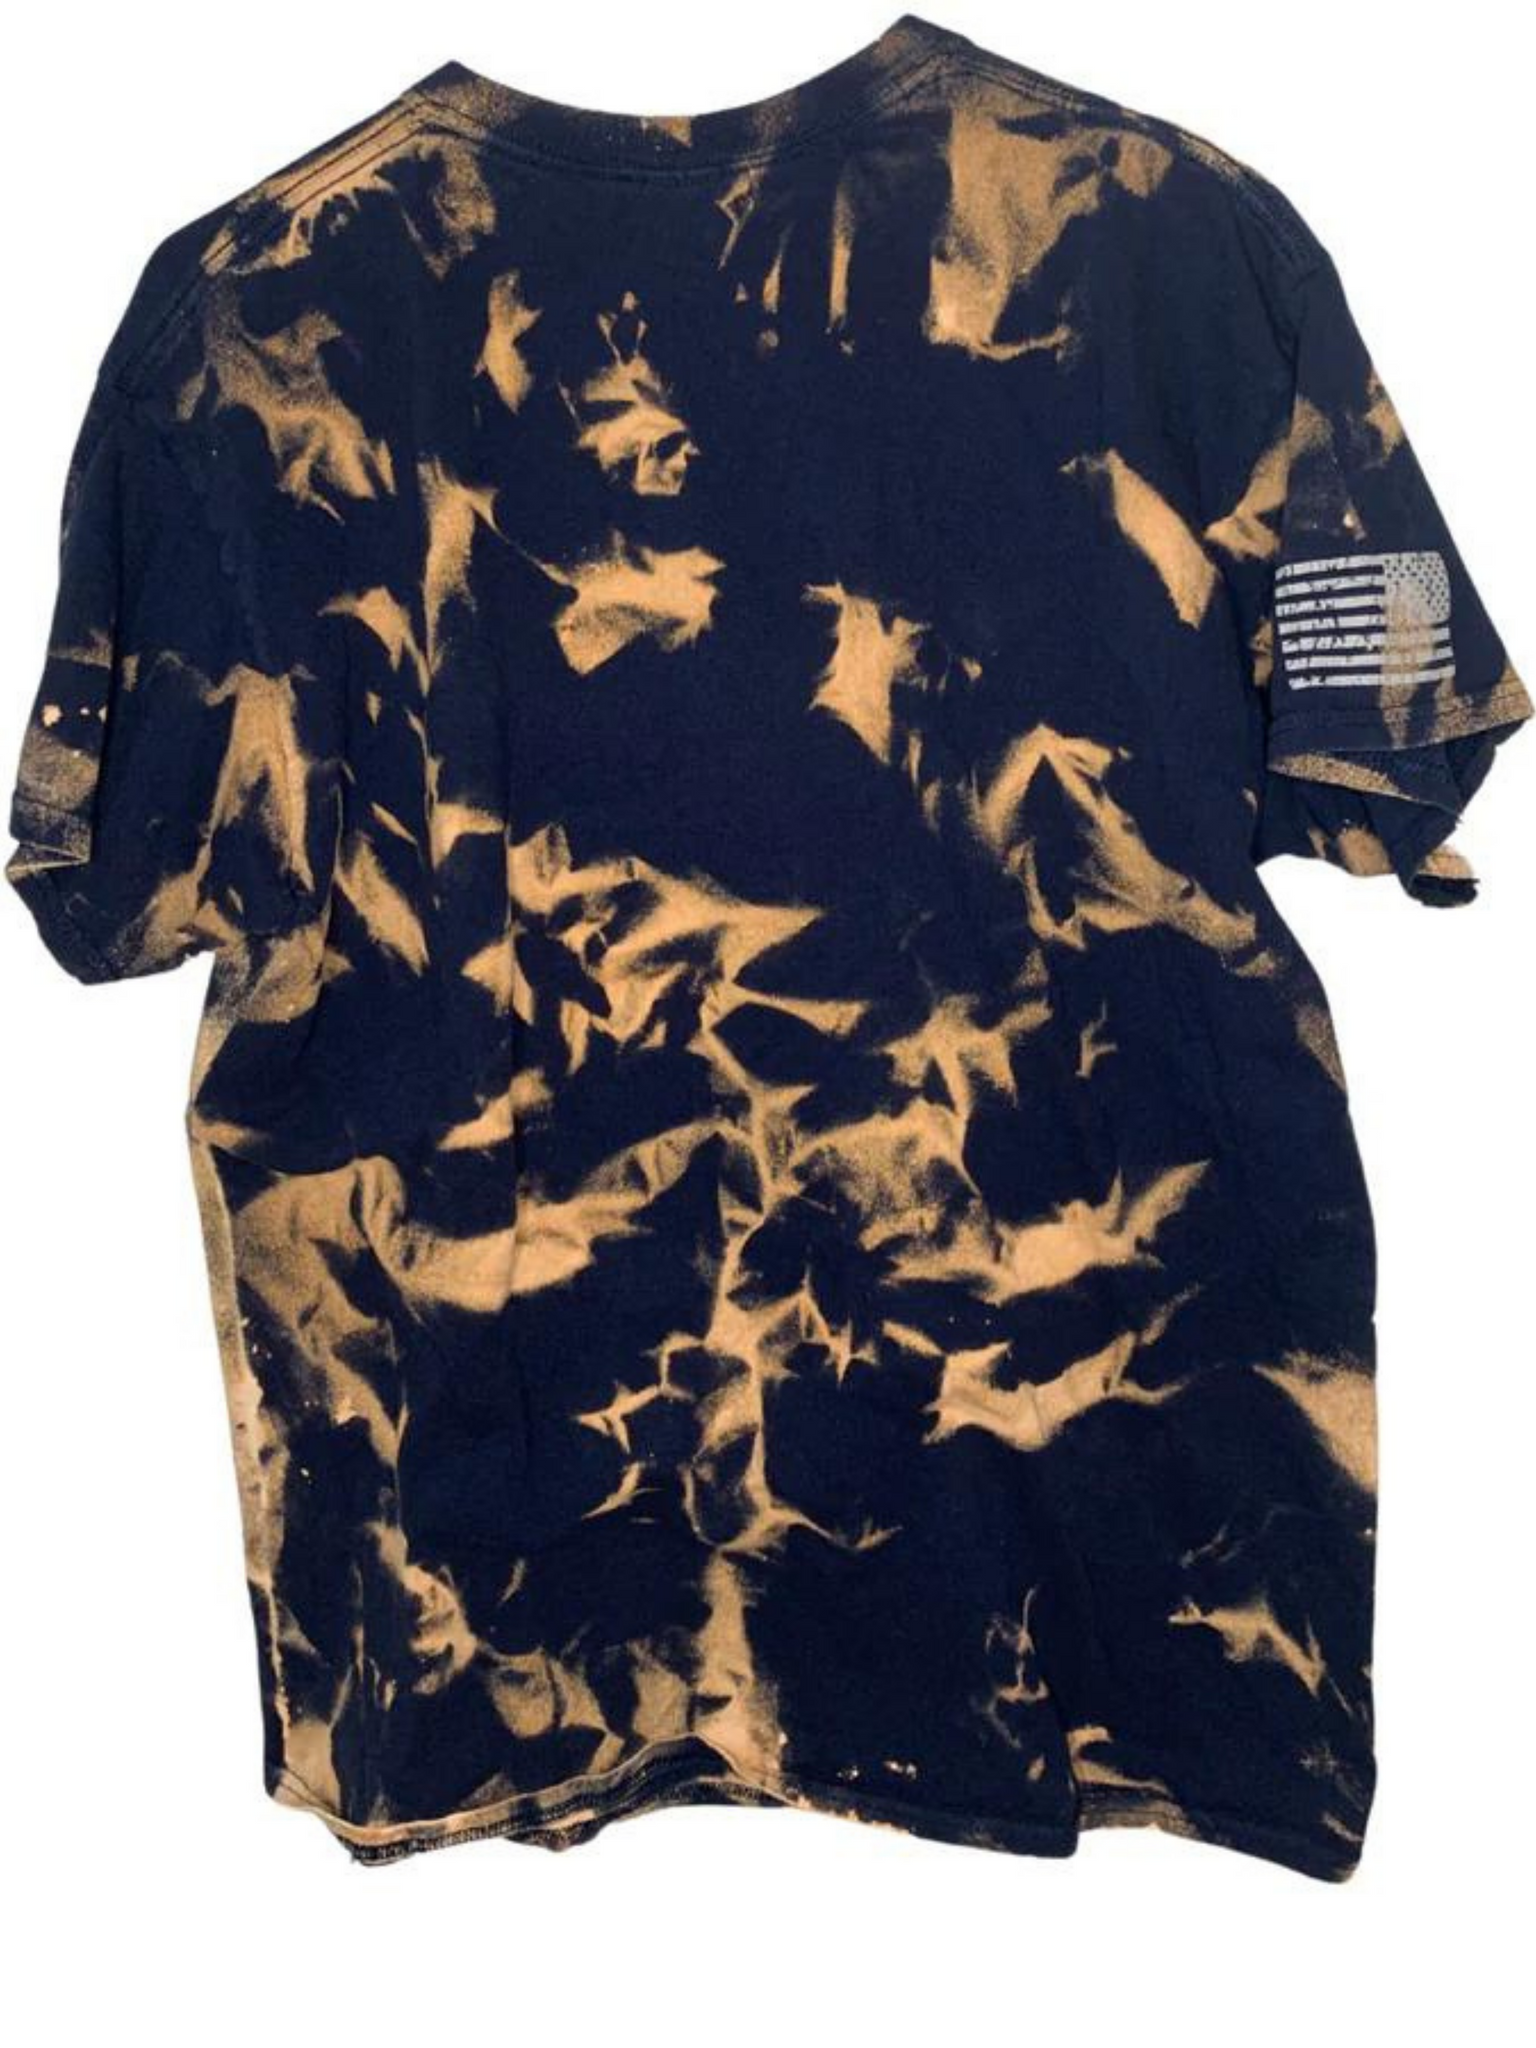 United States Air Force Bleached Shirt